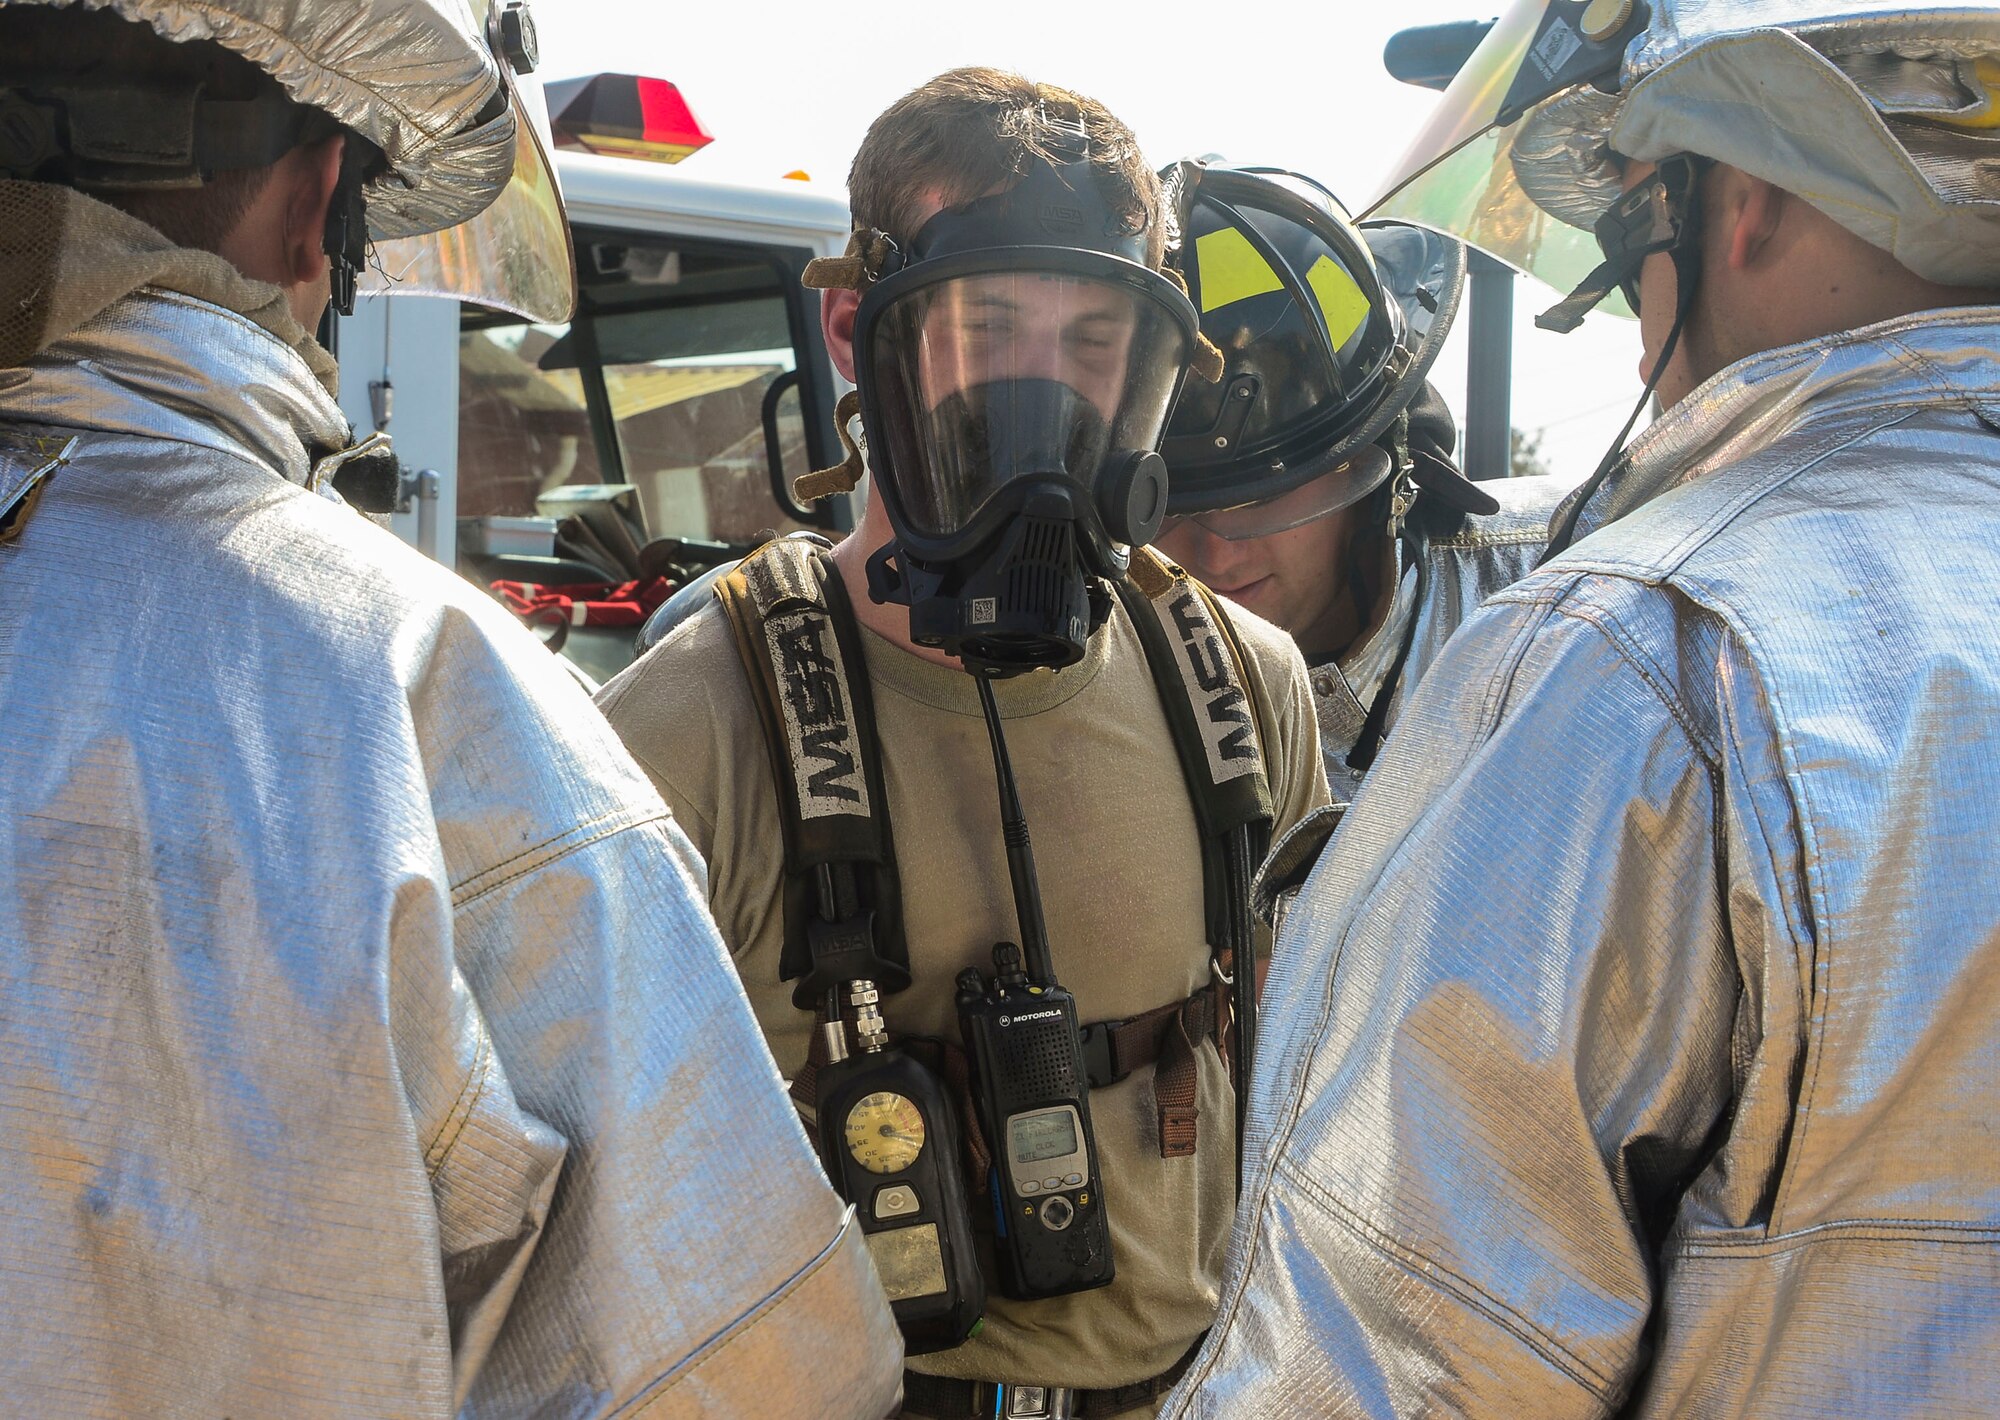 Firefighters from the 612th Air Base Squadron help U.S. Air Force Airman 1st Class Nolan Bailey, remove his contamination suit during a hazardous material exercise on Soto Cano Air Base, Honduras, Feb. 10, 2015. The training exercise was held to guarantee members assigned to the 612th ABS Fire Department are compliant with the Department of Defense’s requirement that all Air Force firefighters are certified to the hazmat technical level. (U.S. Air Force photo/Tech. Sgt. Heather Redman)